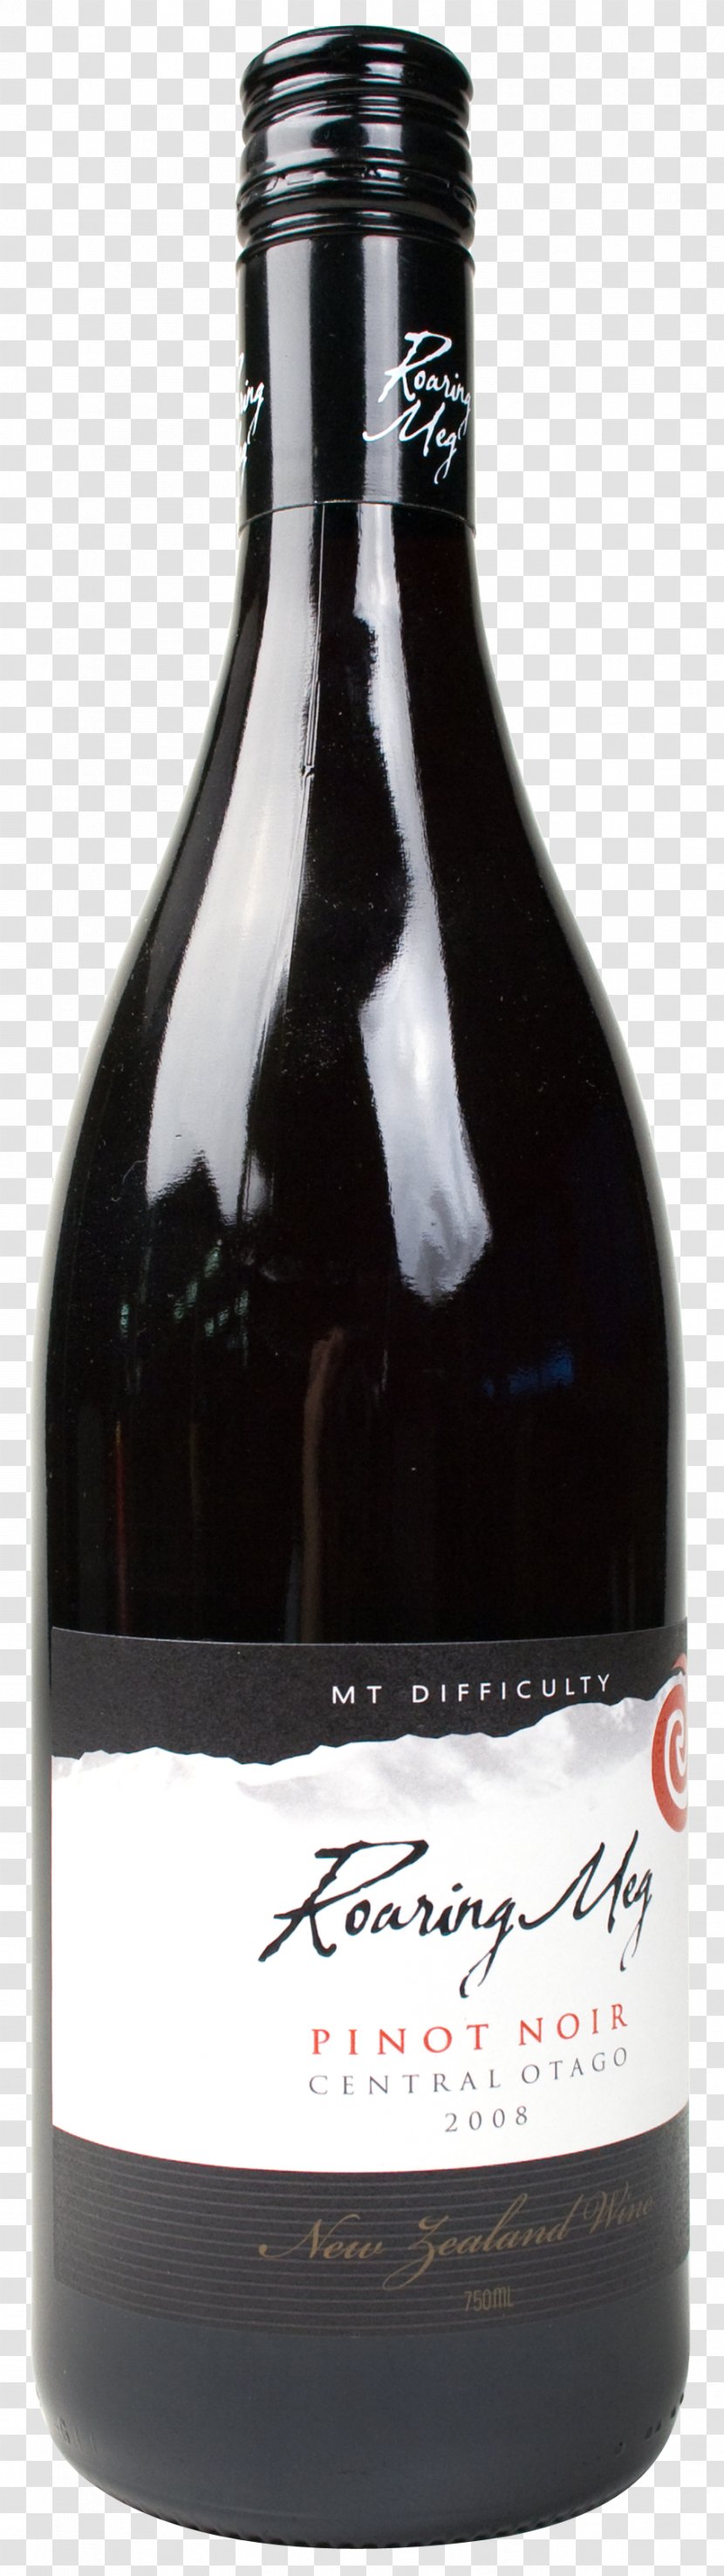 Liqueur Mount Difficulty Mt. Roaring Meg Pinot Noir 2013 Red Wine From New Zealand Dessert - Mushroom Currency Transparent PNG